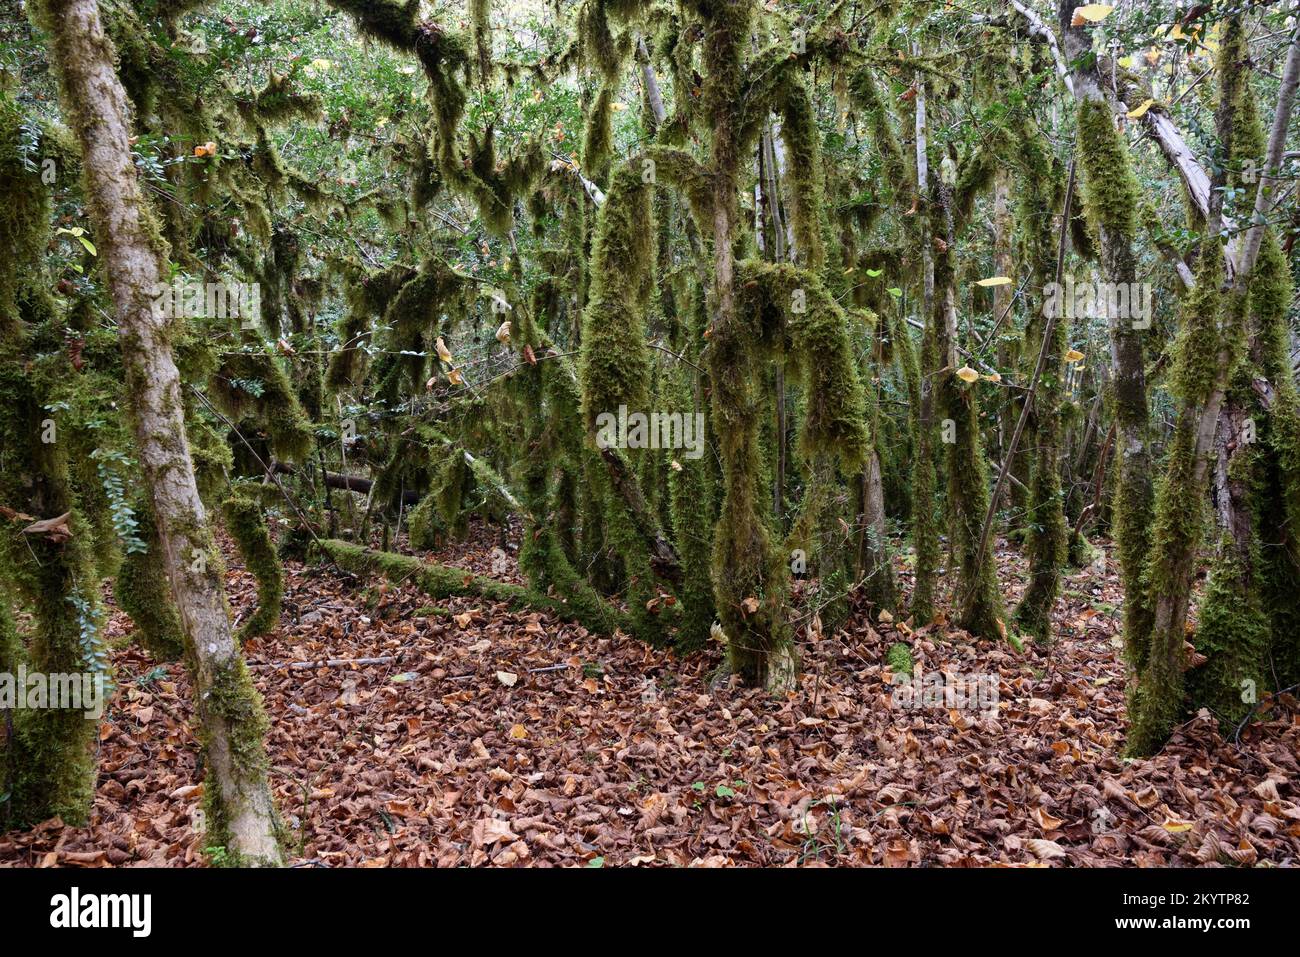 Green Bearded Lichen, Usnea sp, Affecting Common Box Trees or Boxwood Forest, Buxus sempervirens Stock Photo